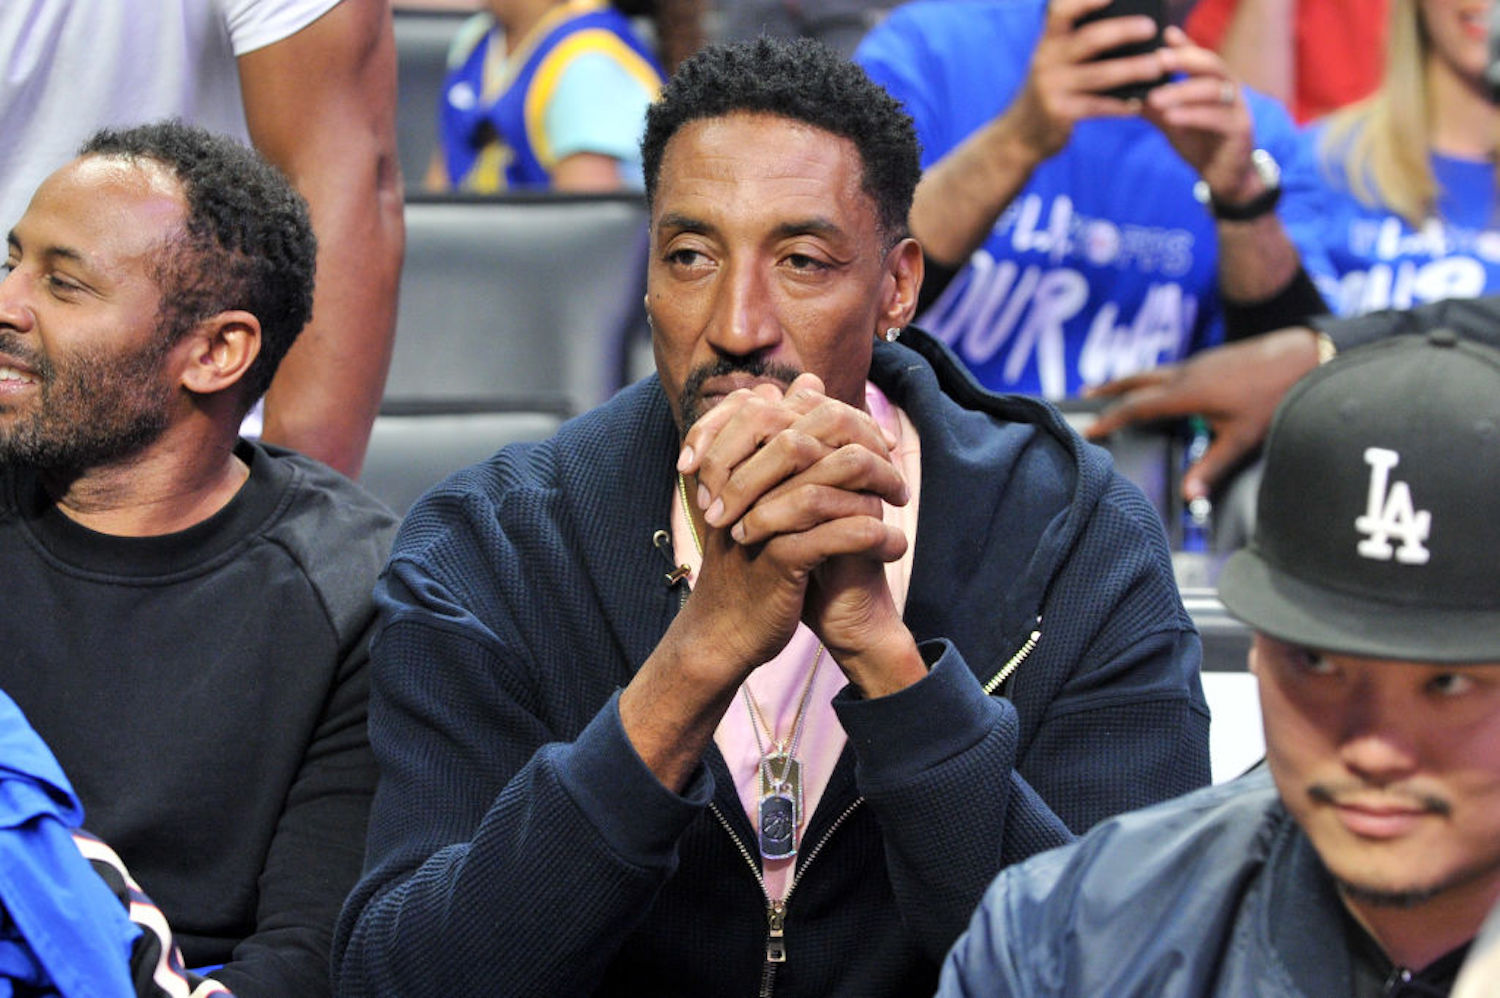 The Chicago Bulls recently hired Billy Donovan to take over as the head coach, but former Bull Scottie Pippen doesn't approve.